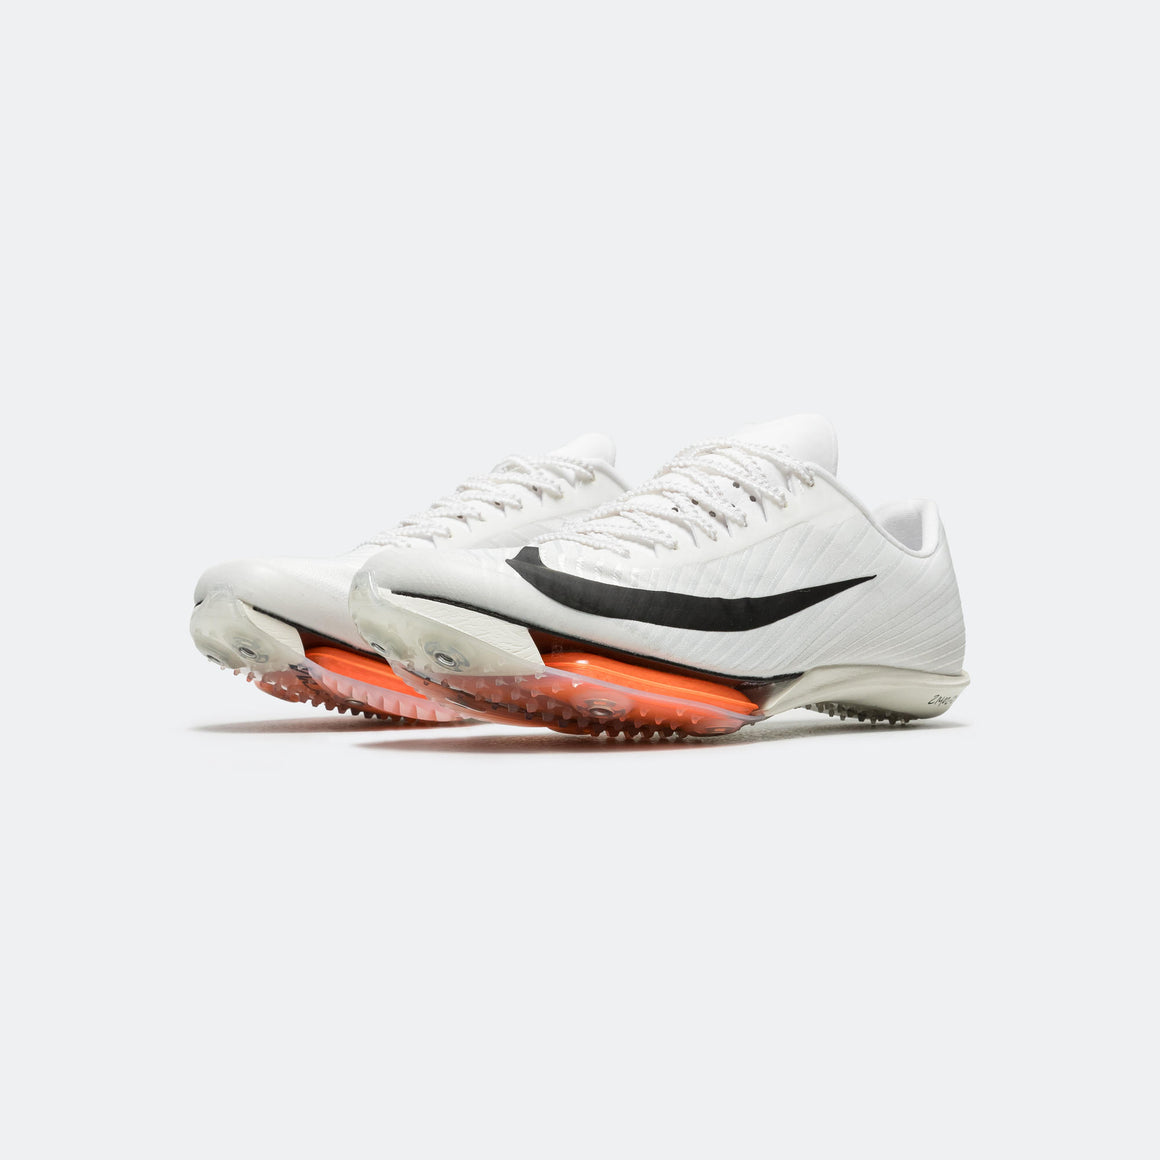 Nike - Air Zoom Maxfly 2 Proto - White/Black-Total Orange - Up There Athletics